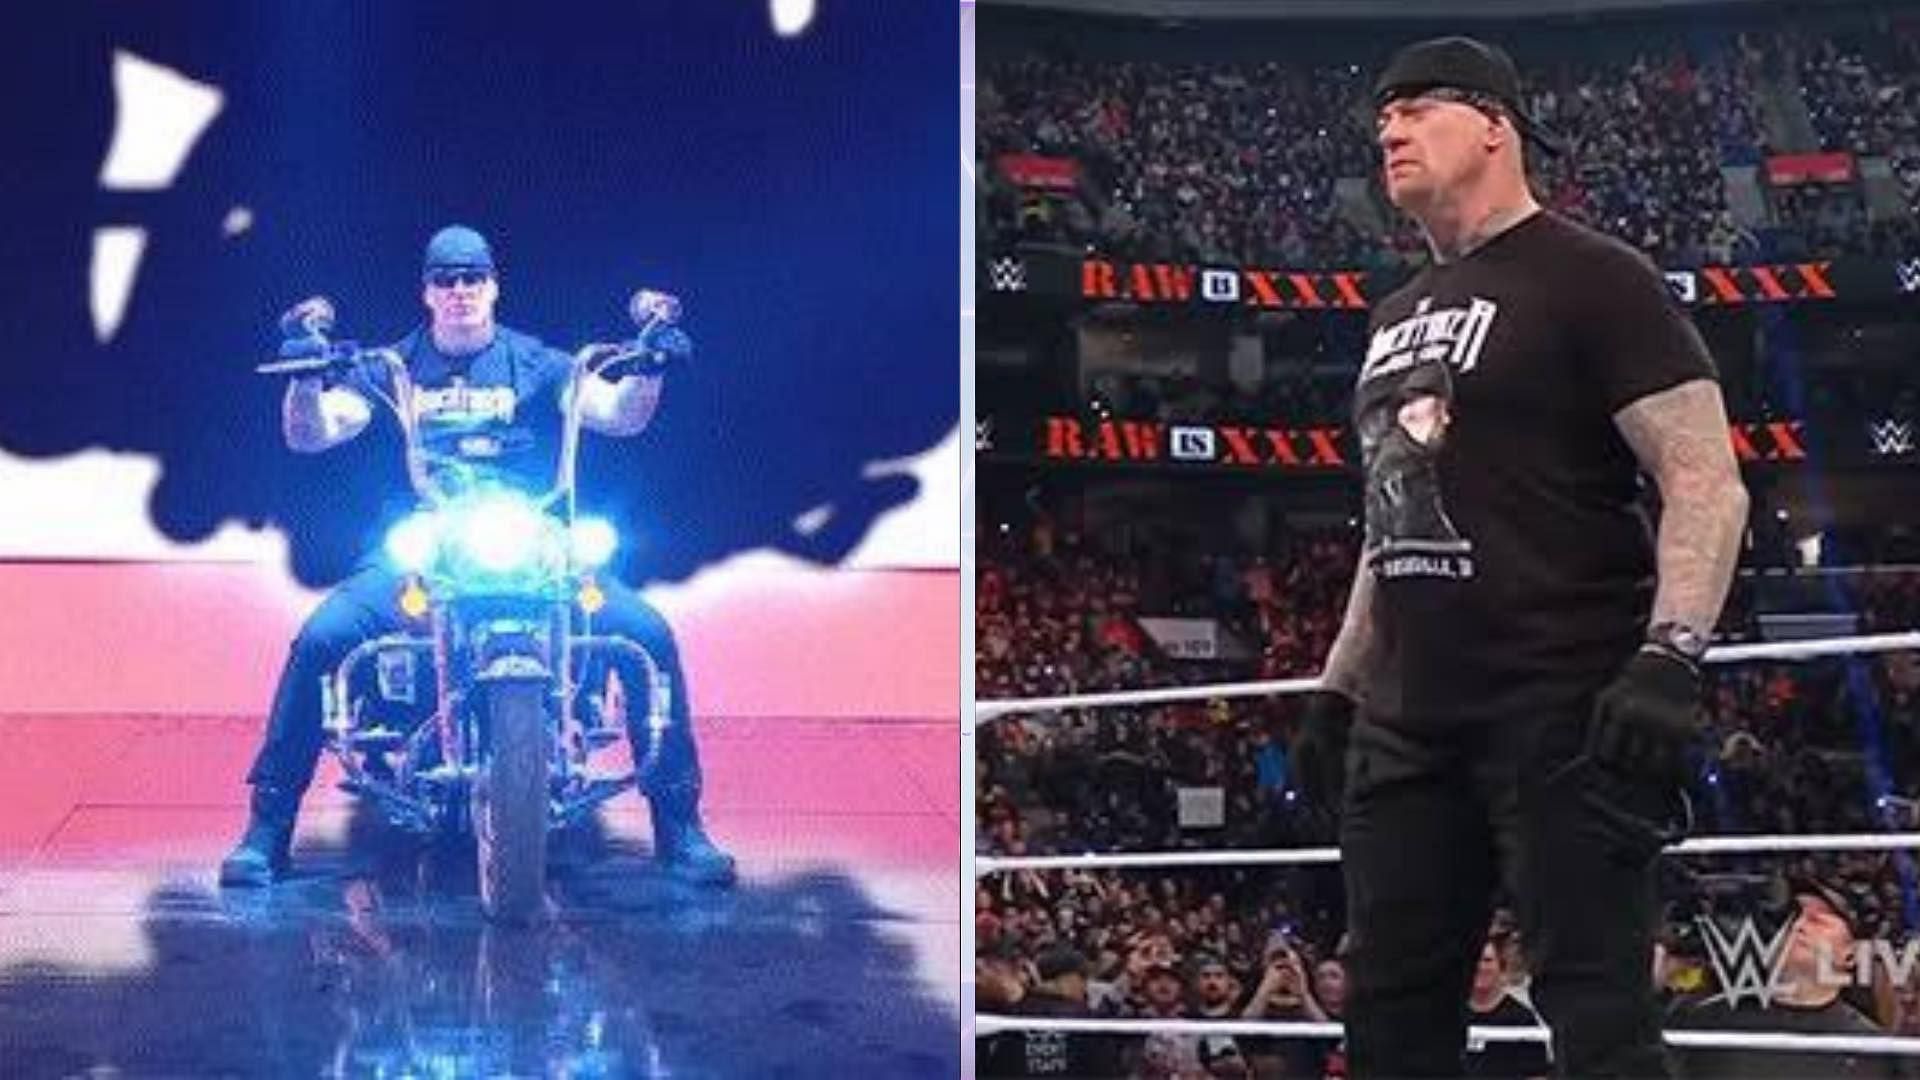 The Undertaker appeared at WWE